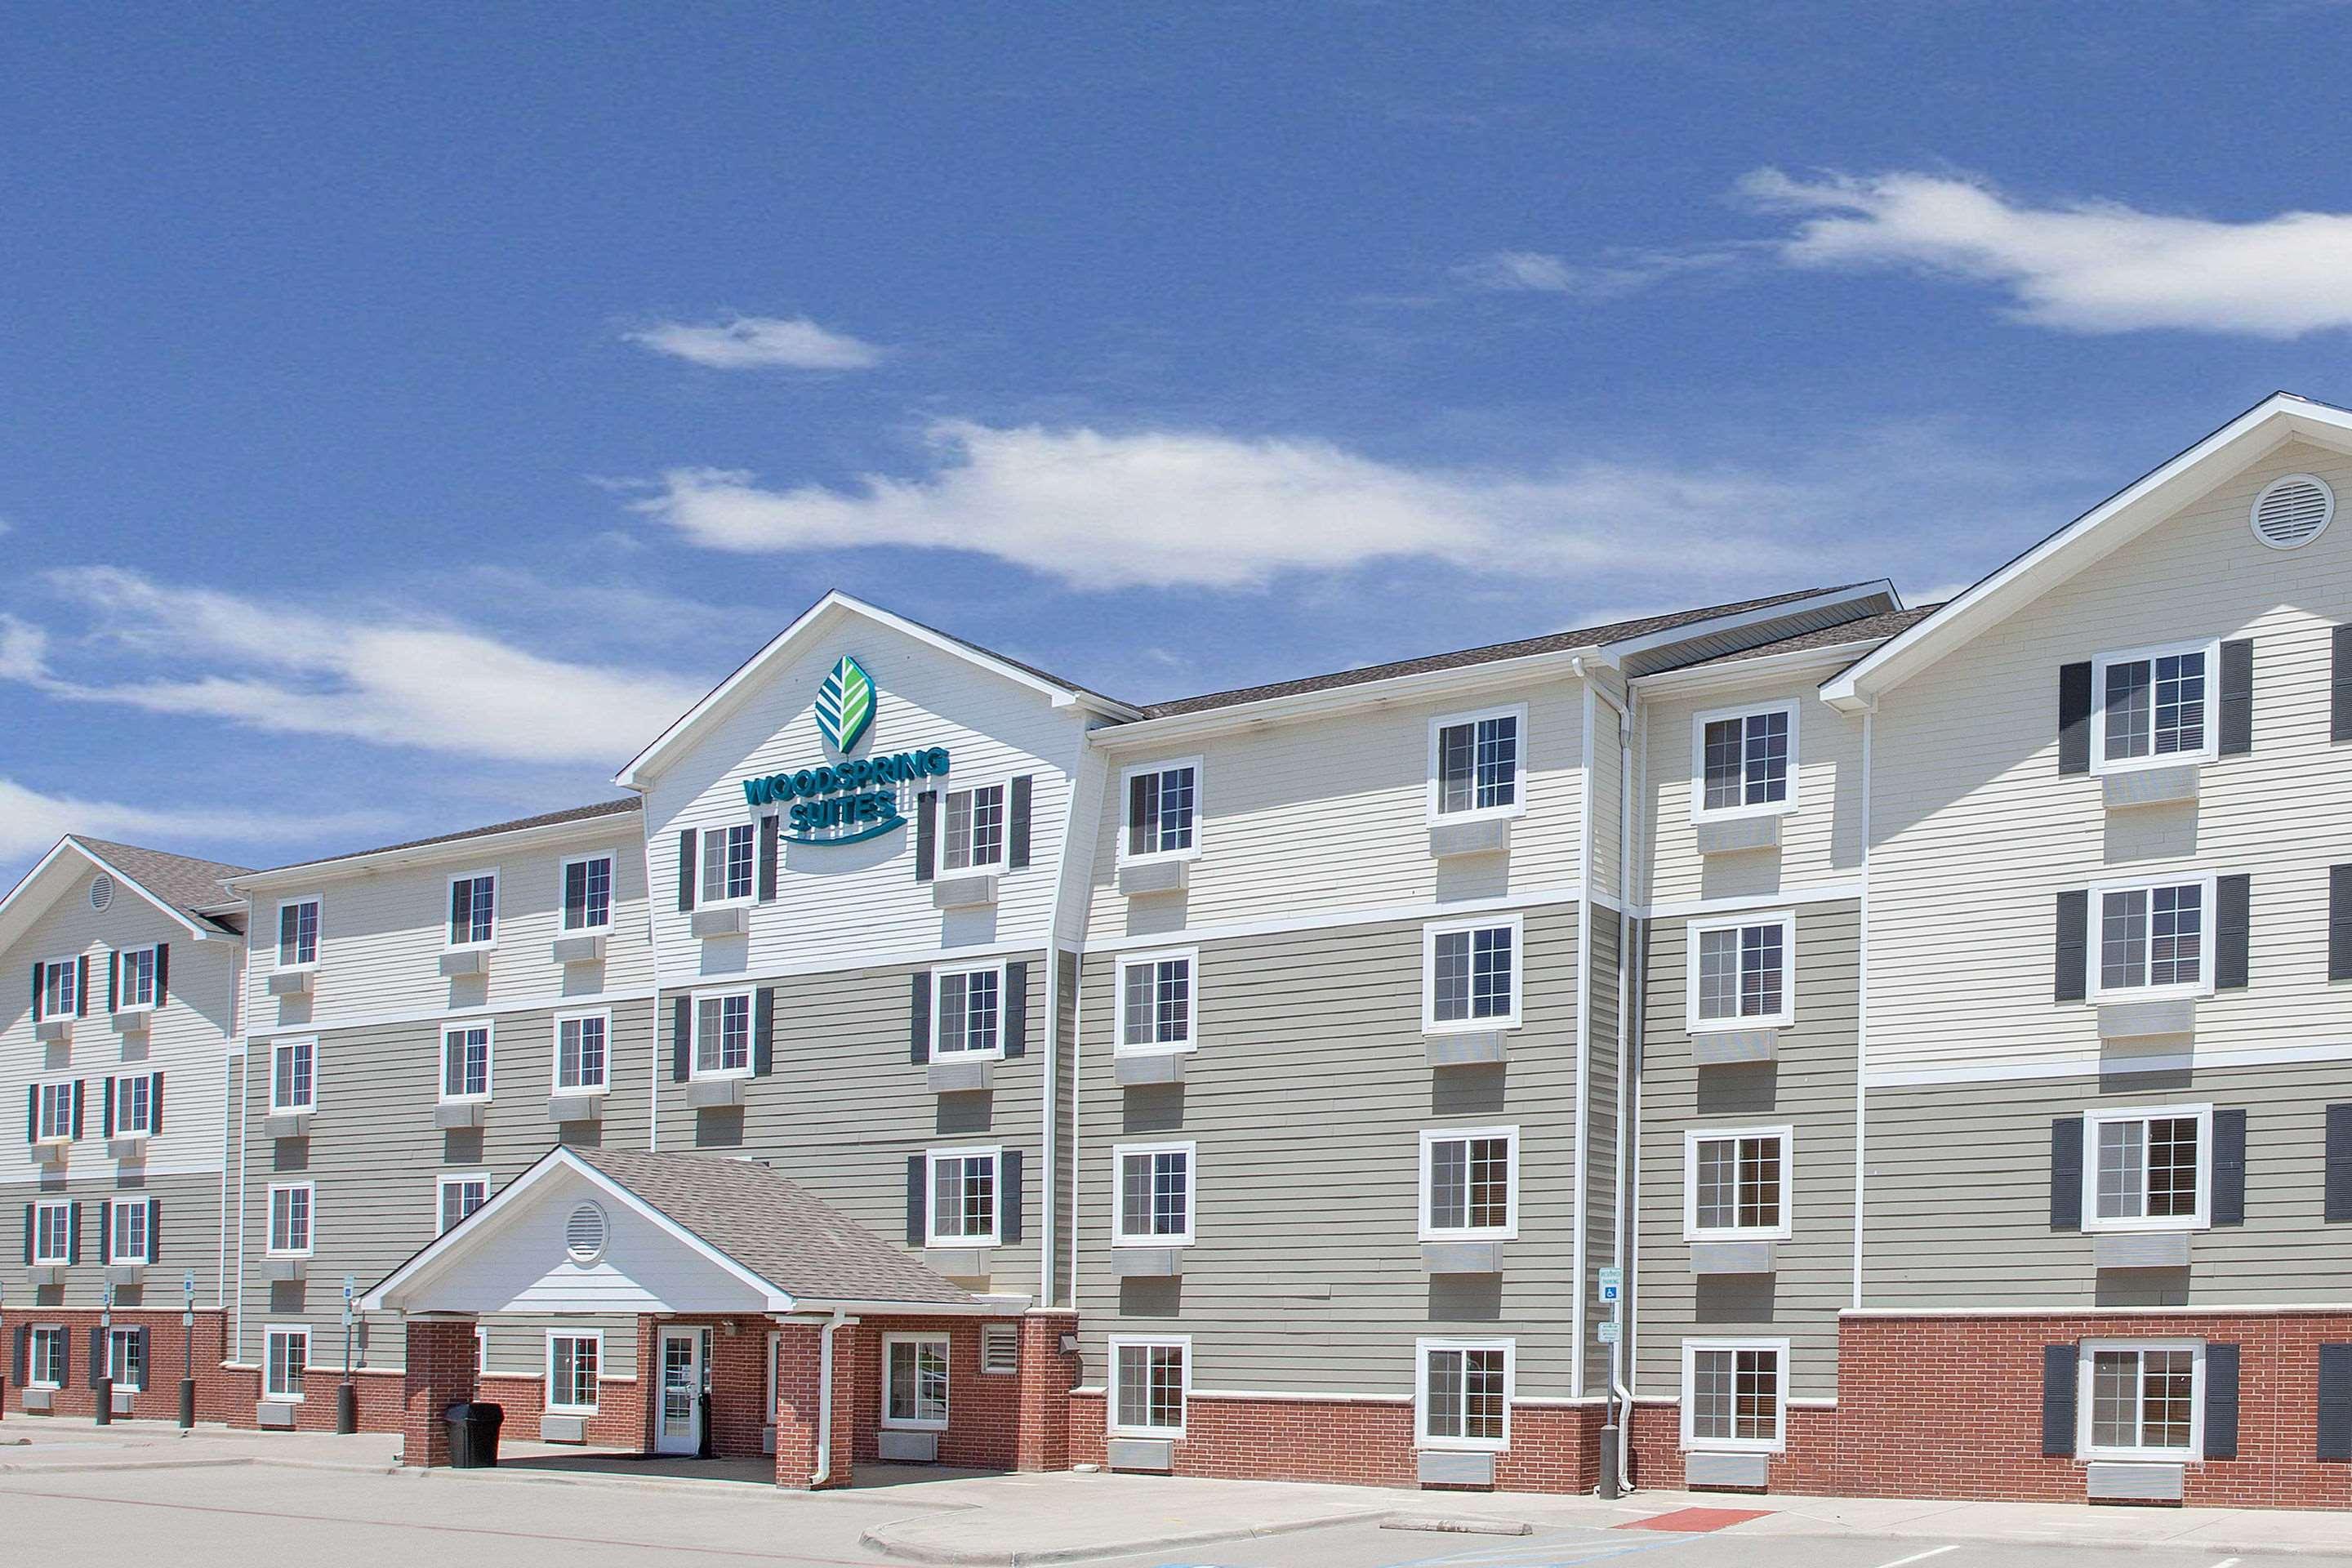 WoodSpring Suites Lexington in Lexington: Find Hotel Reviews, Rooms, and  Prices on Hotels.com